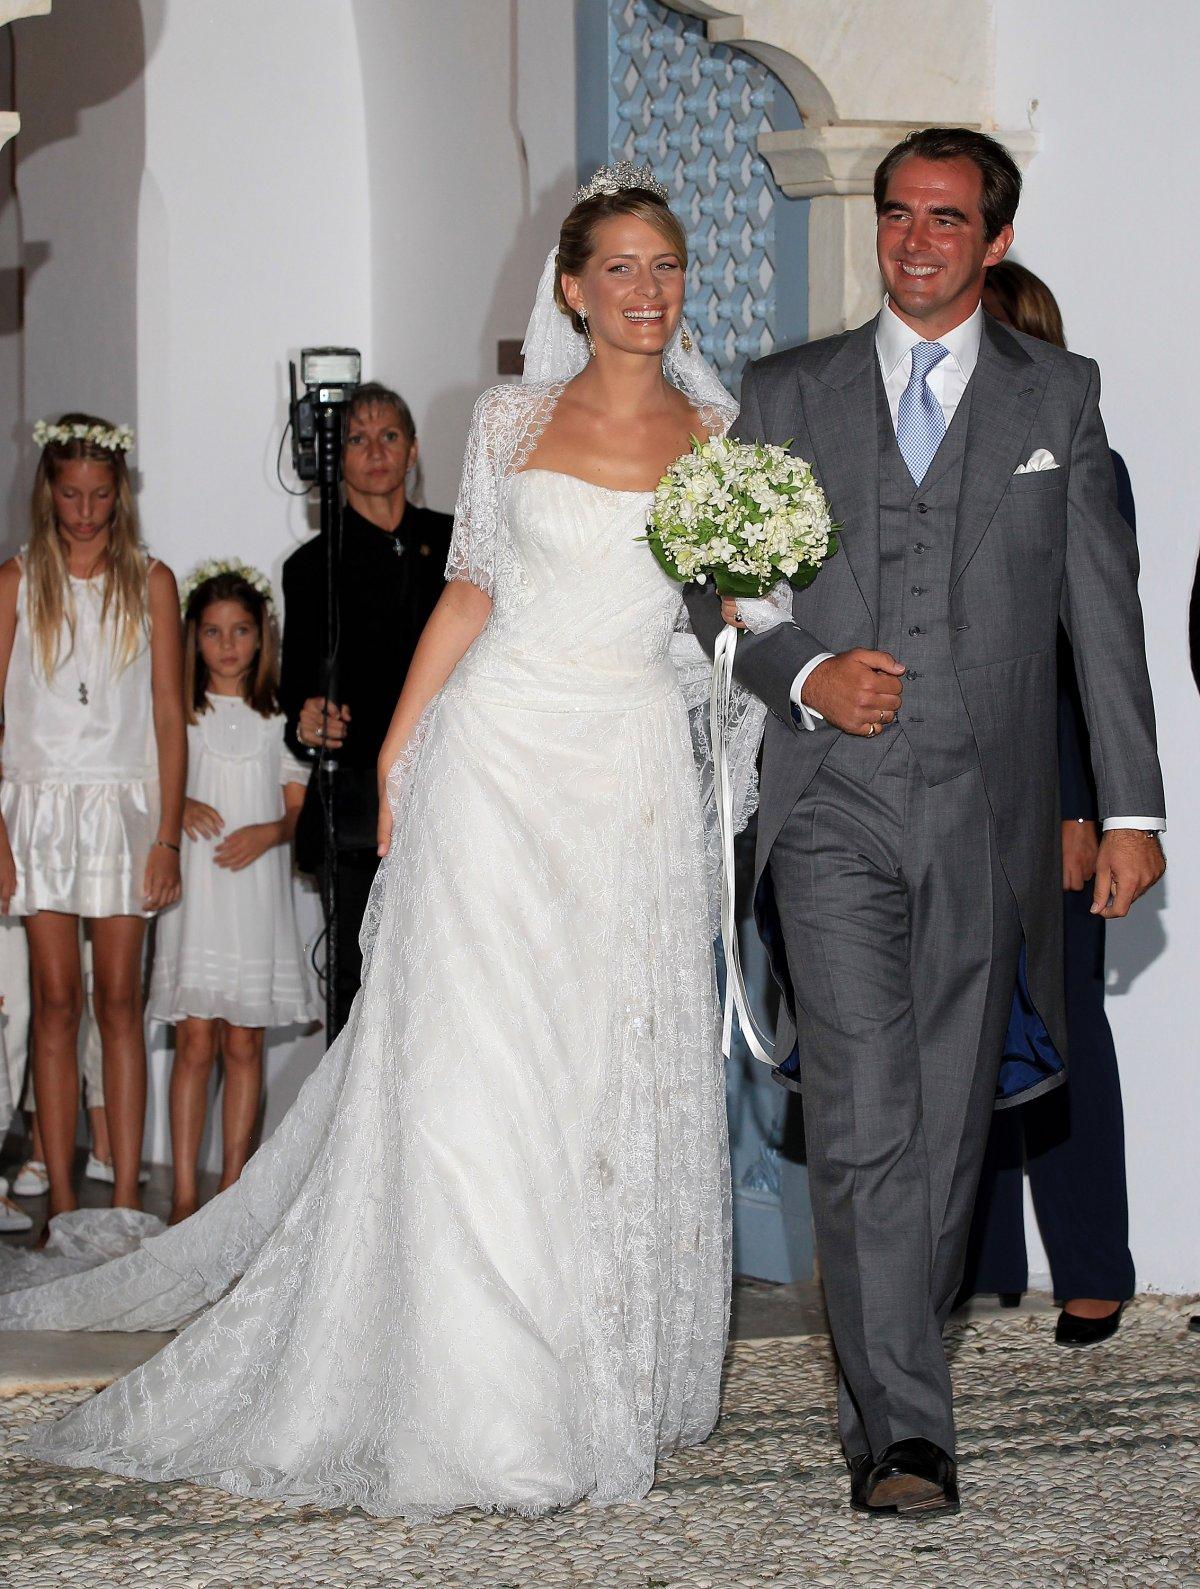 Prince Nikolaos of Greece and Princess Tatiana Blatnik leave after getting married at the Cathedral of Ayios Nikolaos in 2010 in Spetses, Greece.